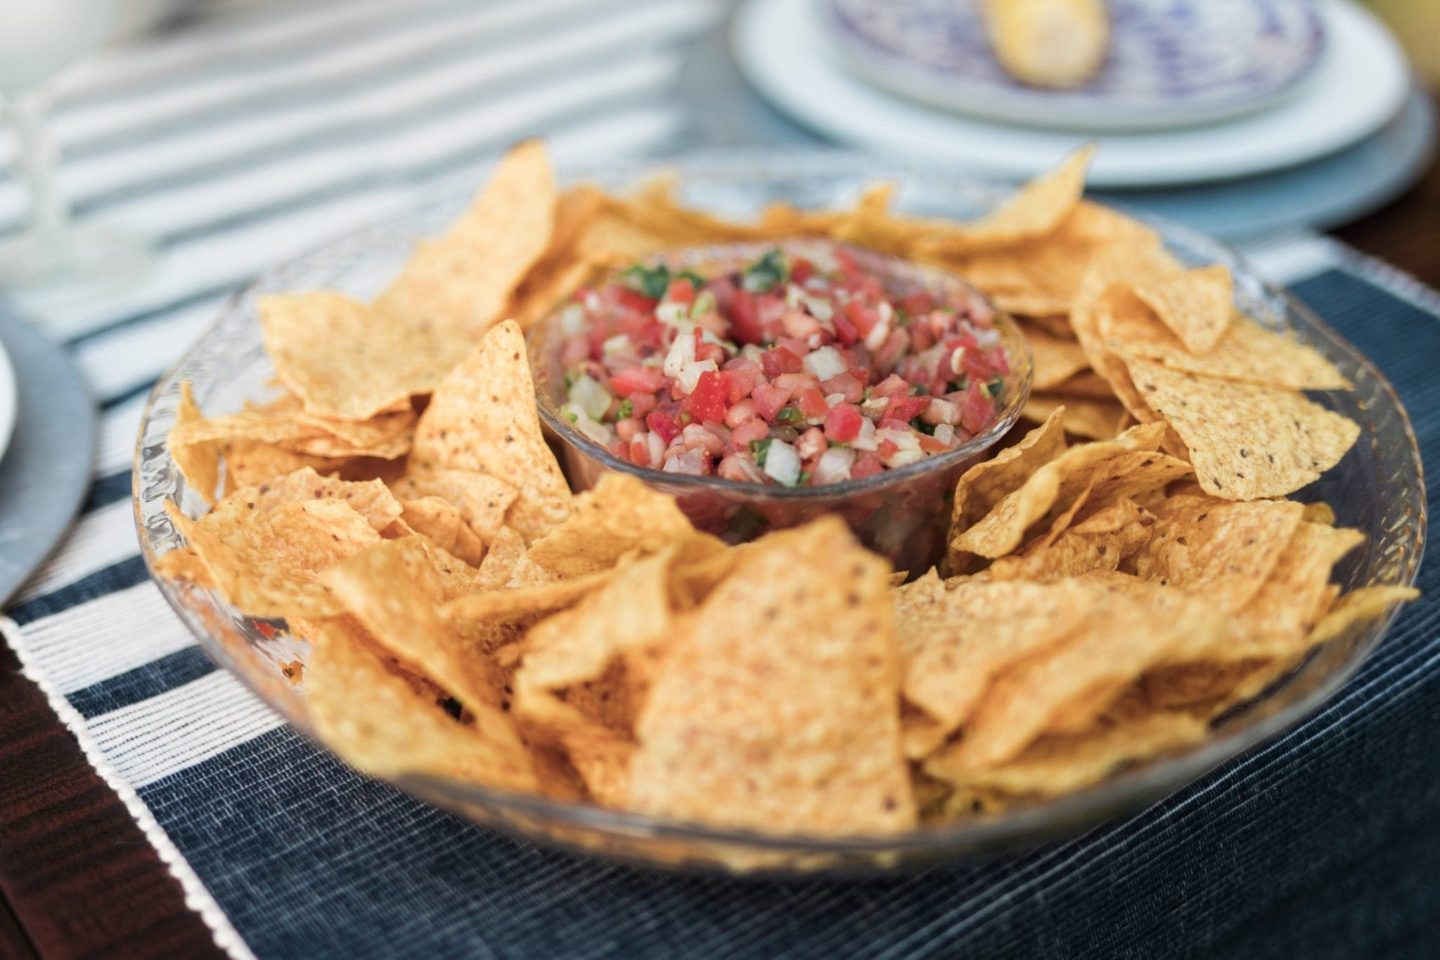 Black eyed pea salad recipe for 4th of July party food.